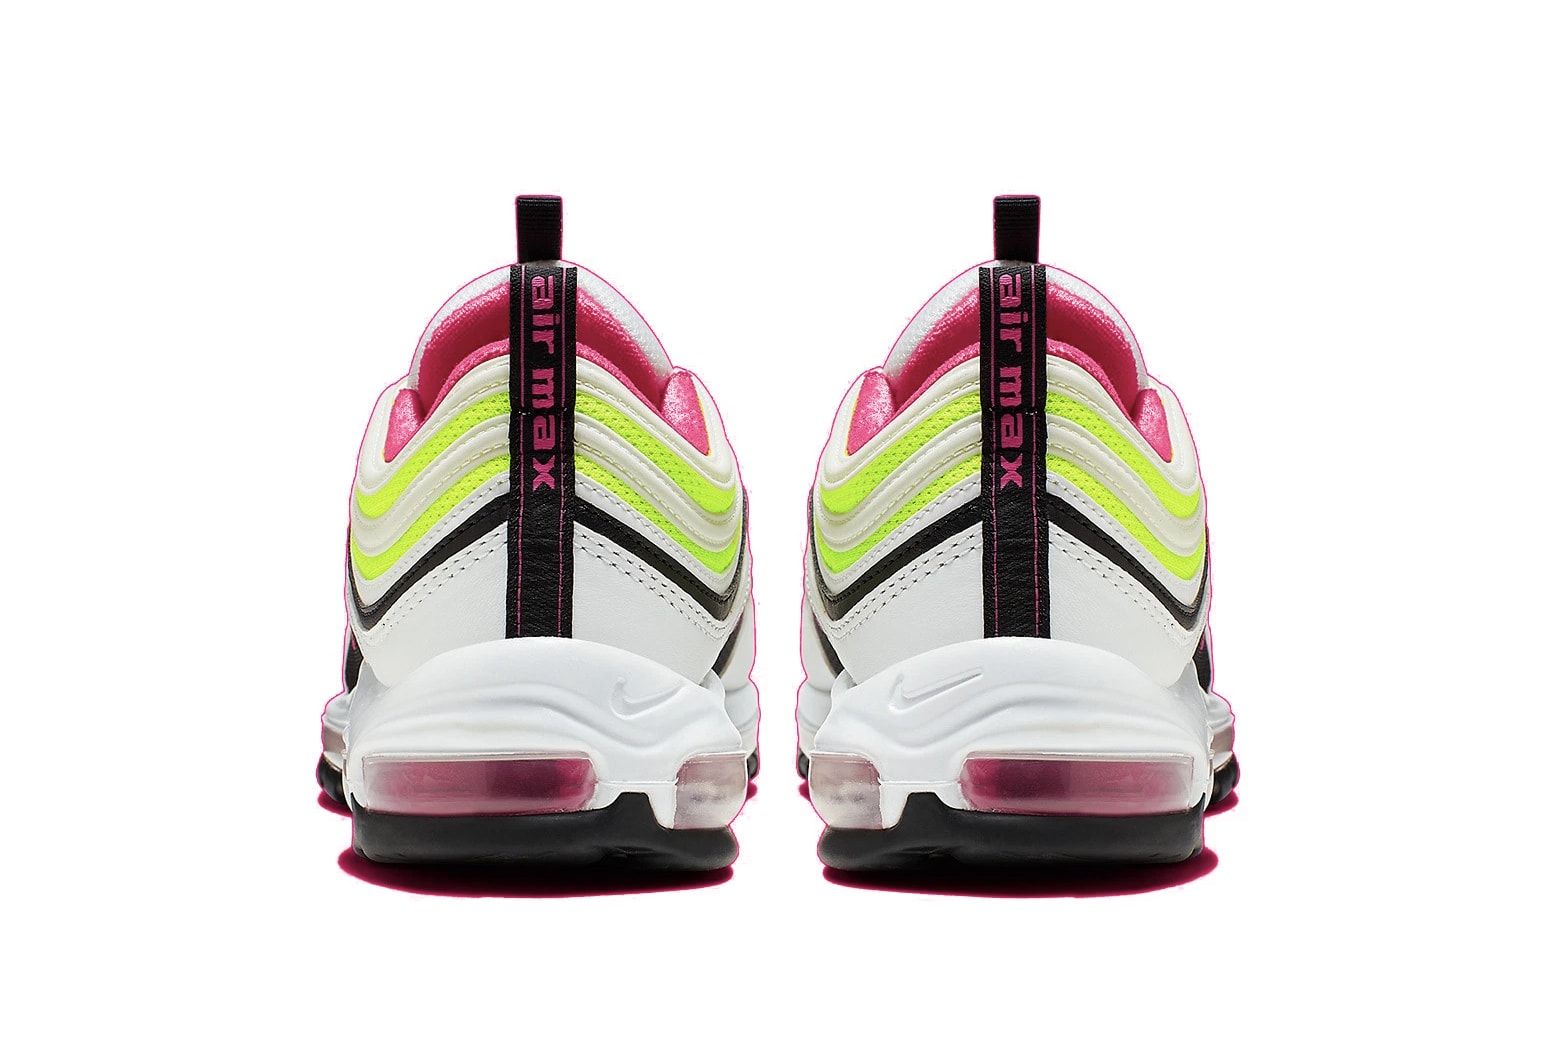 Nike Air Max 97 "Rush Pink/Volt" Neon Sneaker Shoe Release Spring Summer Shoe 